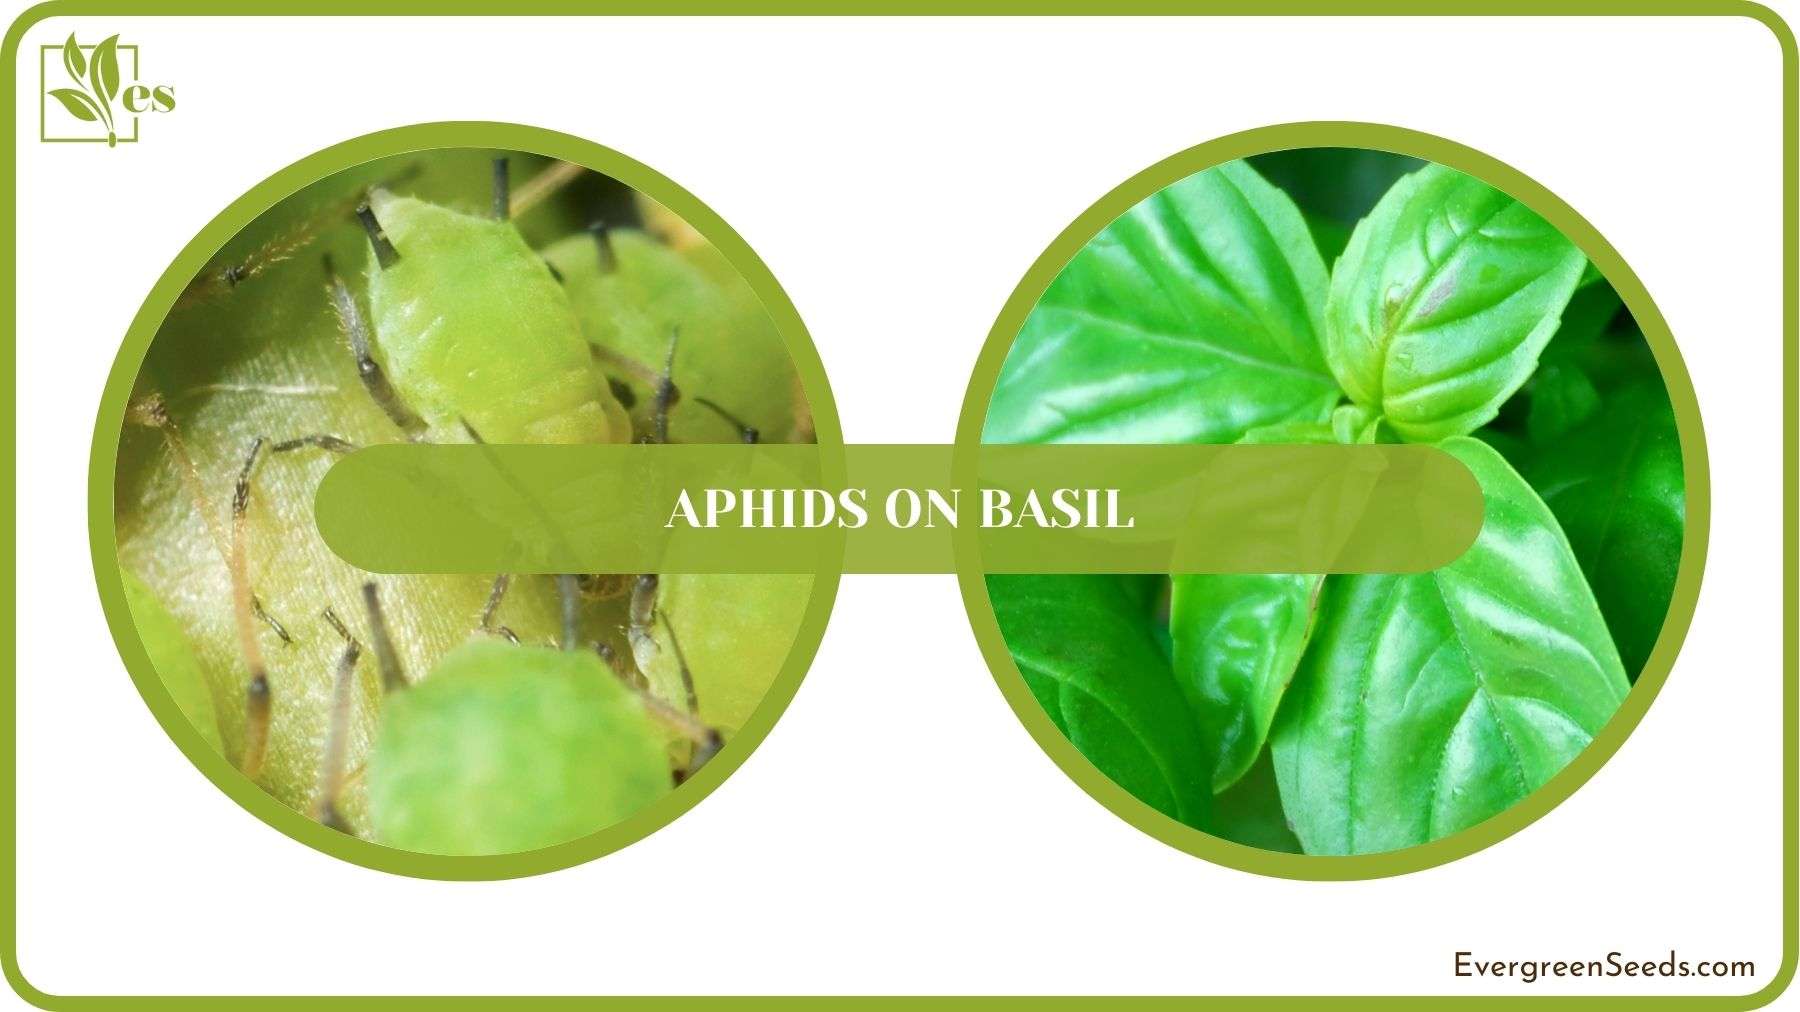 Aphids on Basil